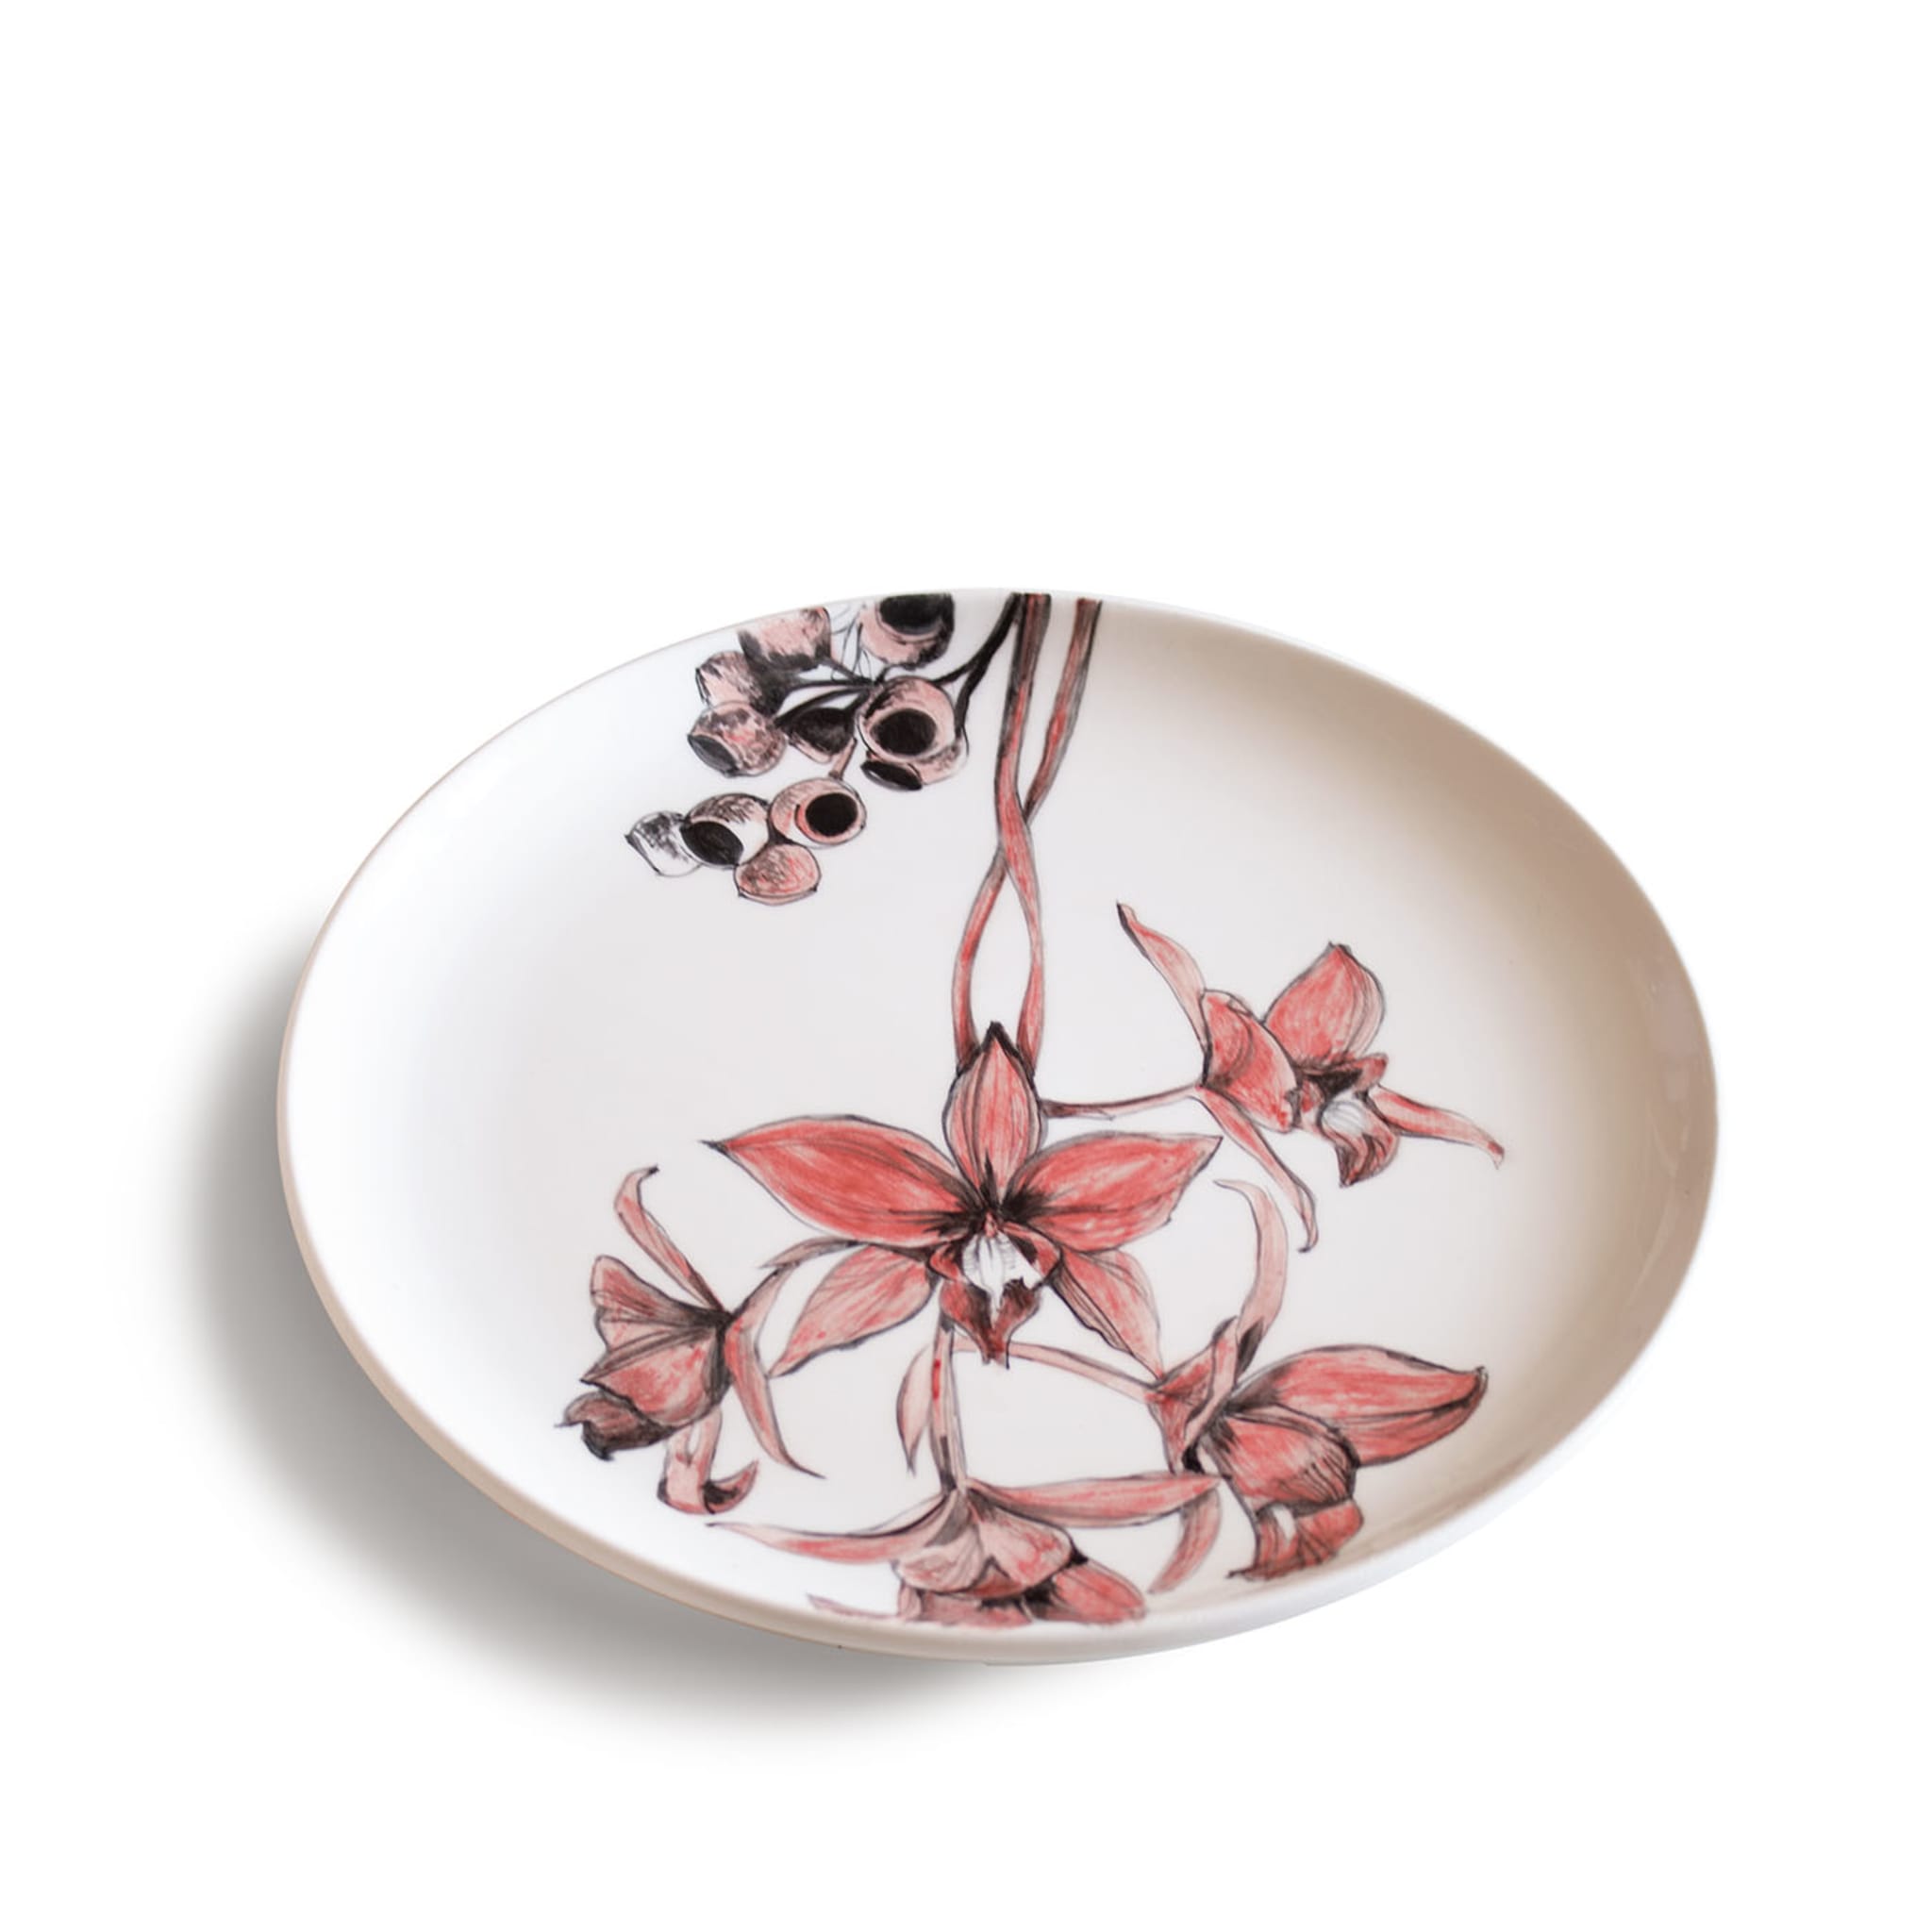 Ethereal Blossom Dinner Plate - Alternative view 1